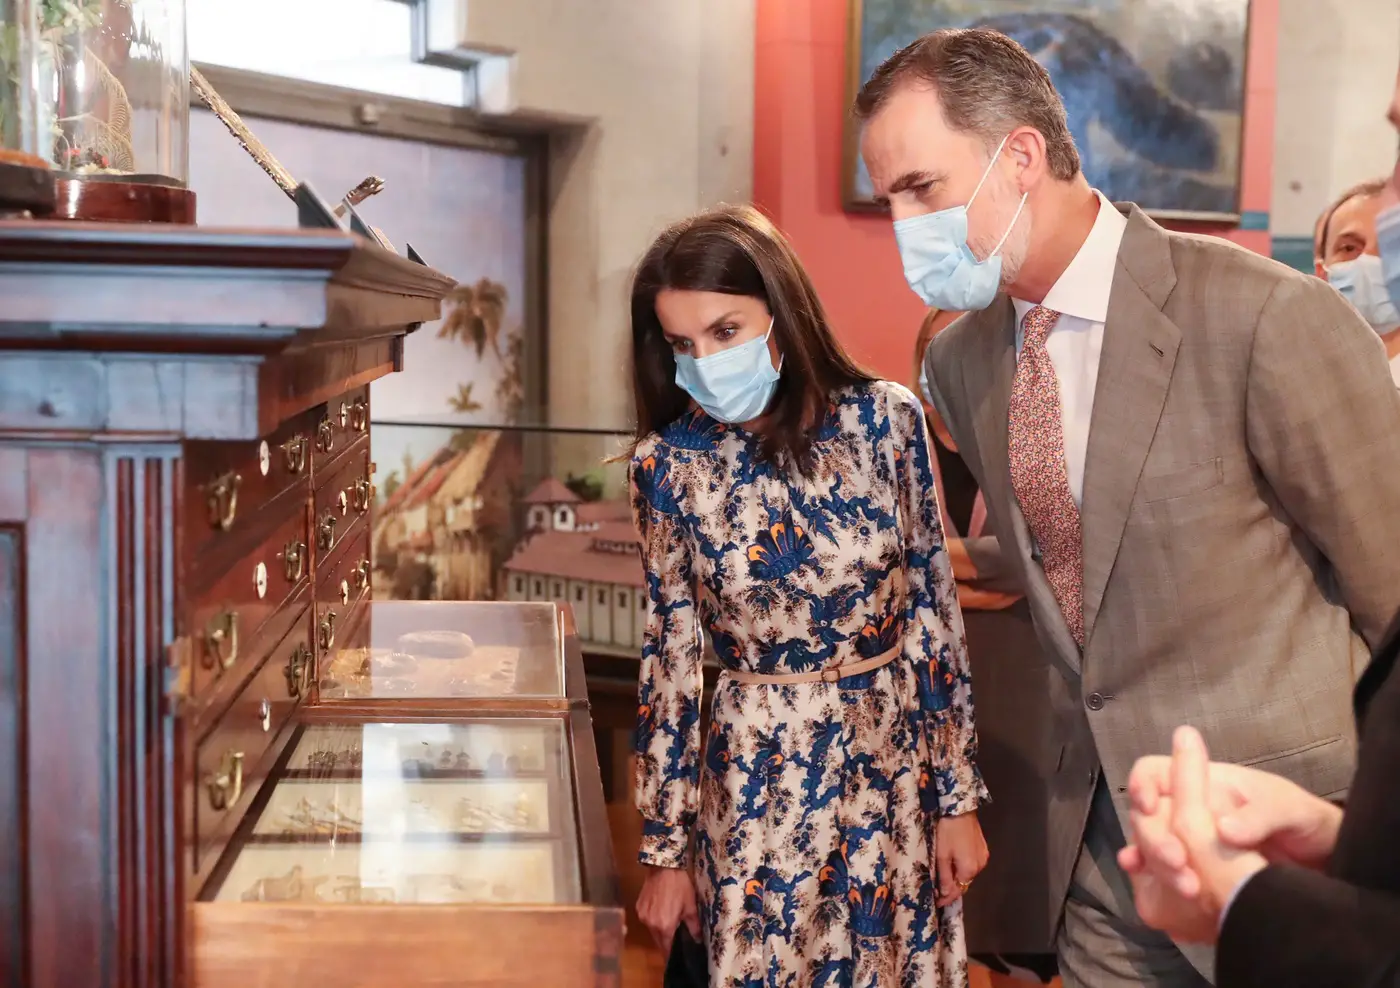 King Felipe and Queen Letizia of Spain visited Natural Science Museum